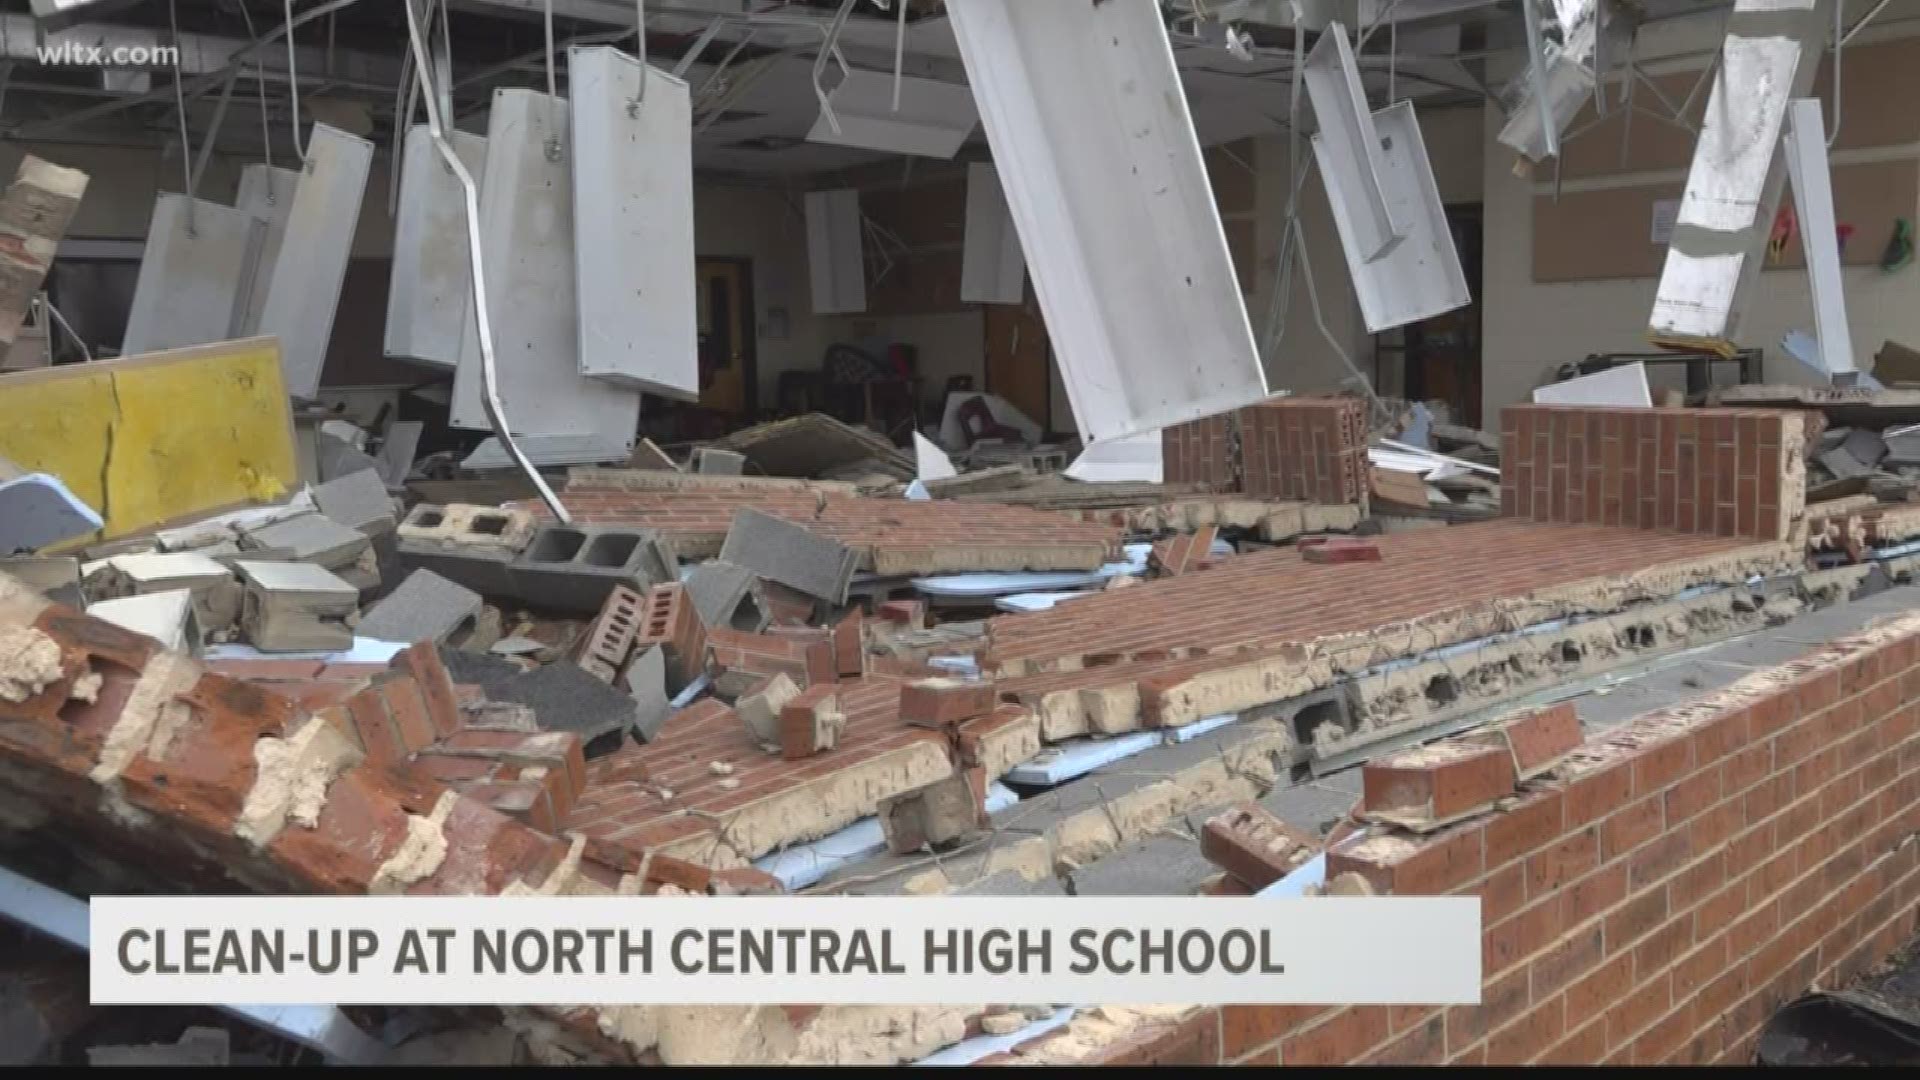 Dozens of teachers are going through the debris at North Central High School to see what they can salvage.